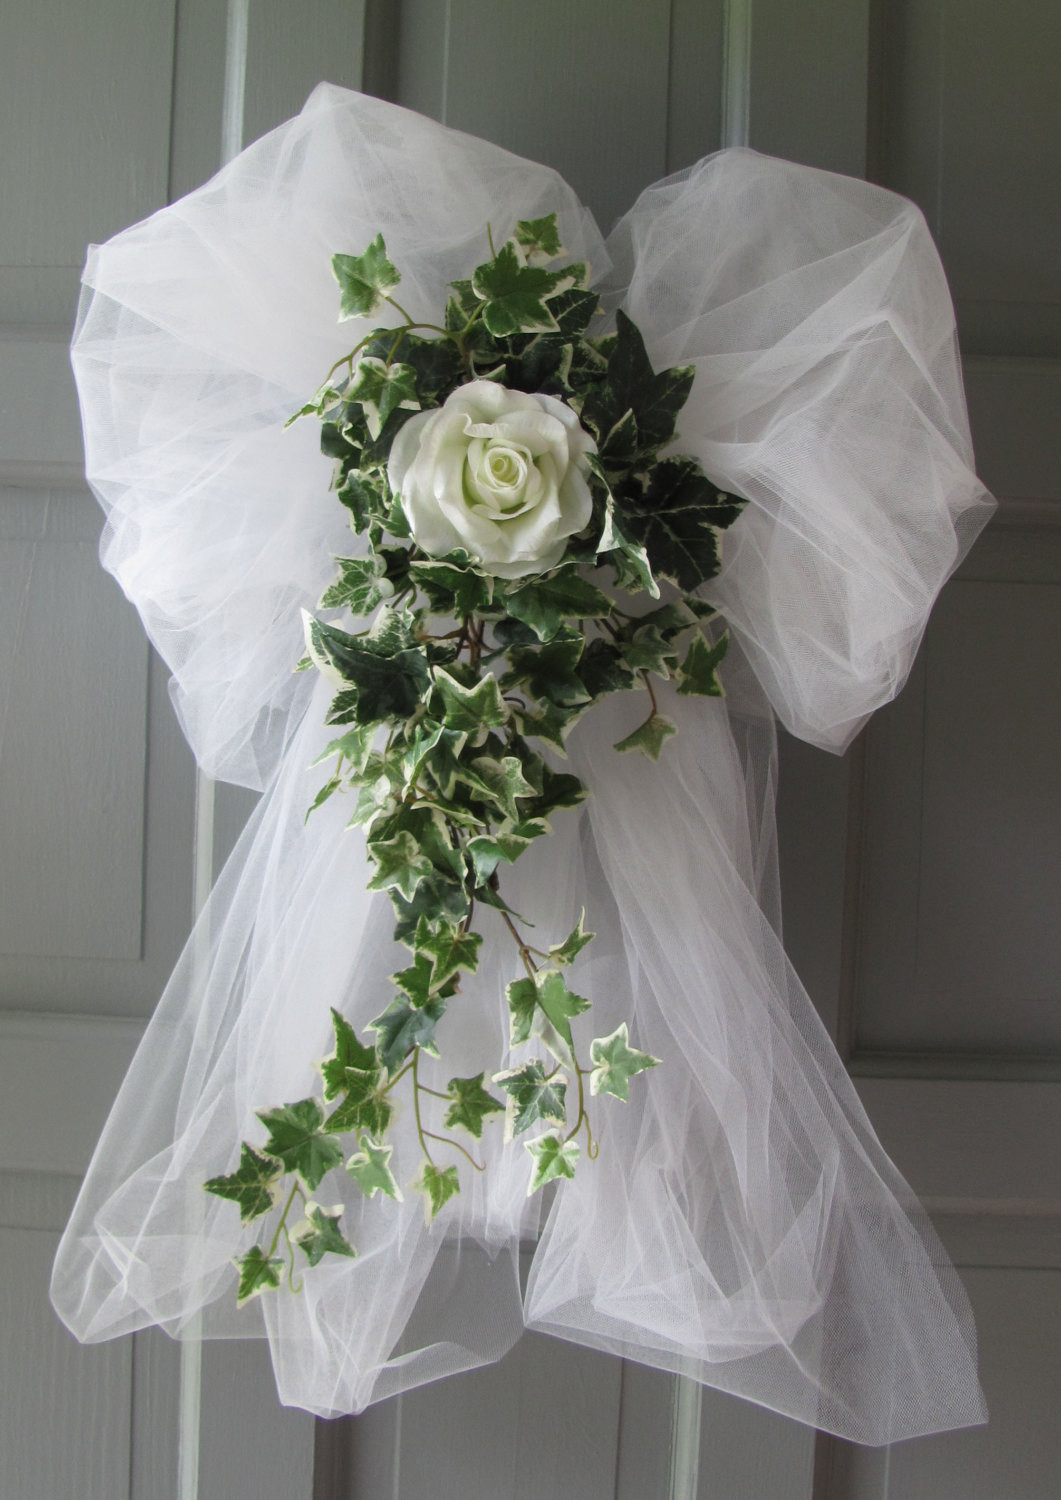 Tulle Wedding Decorations
 Wedding Decorations Rose Ivy Tulle Bows by